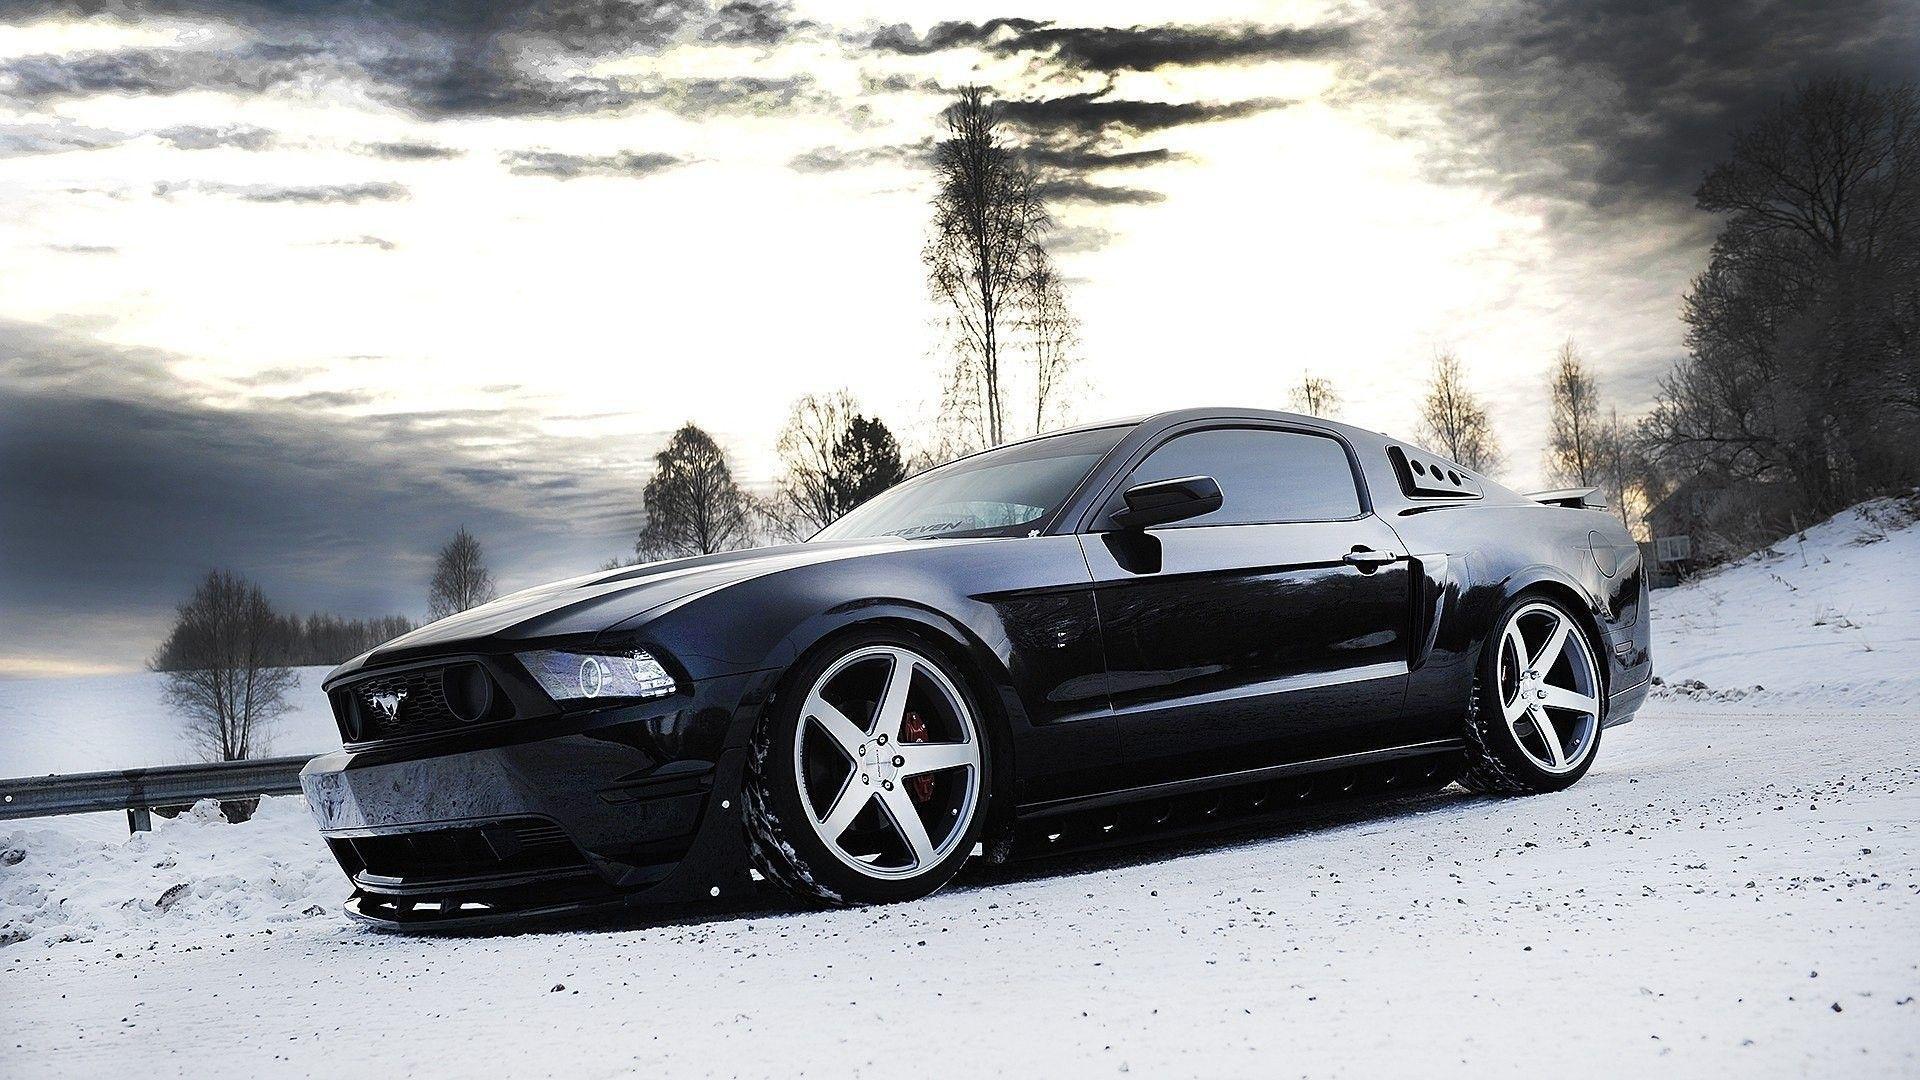 Ford Mustang Wallpaper 1794 1920x1080 px